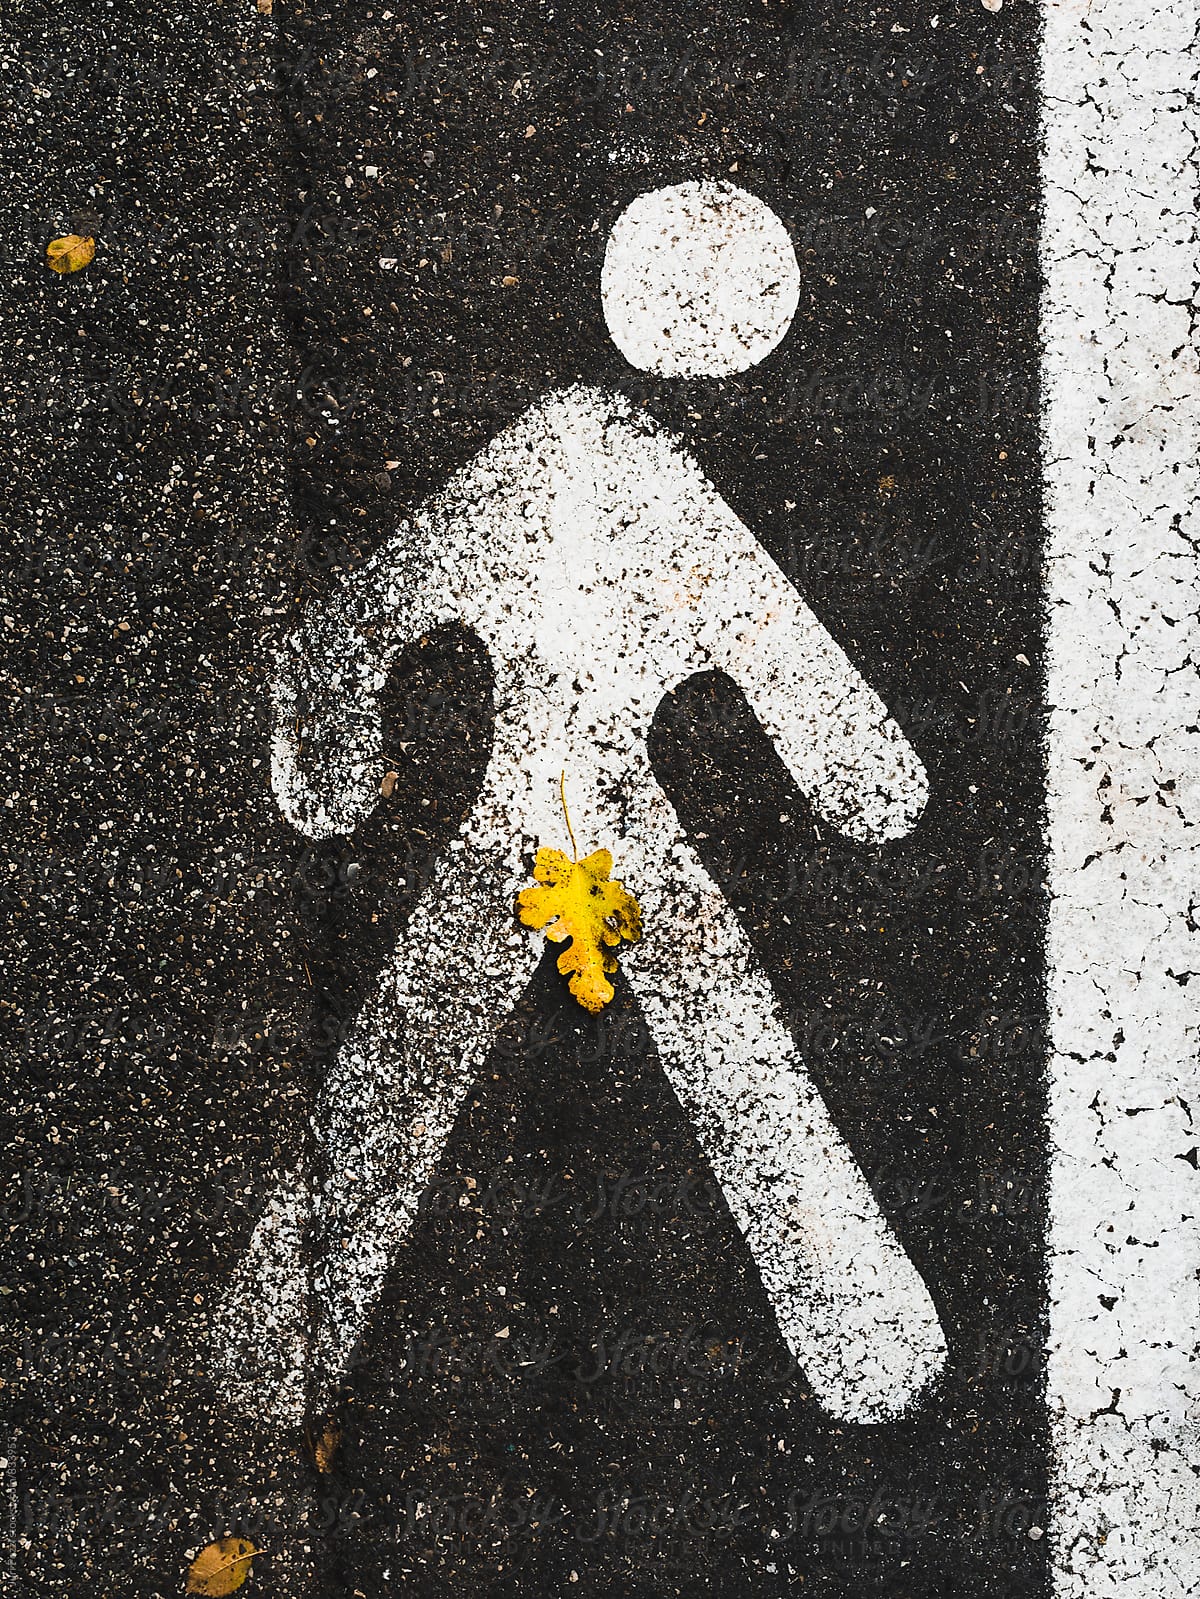 Sign Of A Naked Pedestrian With A Fig Leaf By Stocksy Contributor Studio Marmellata Stocksy